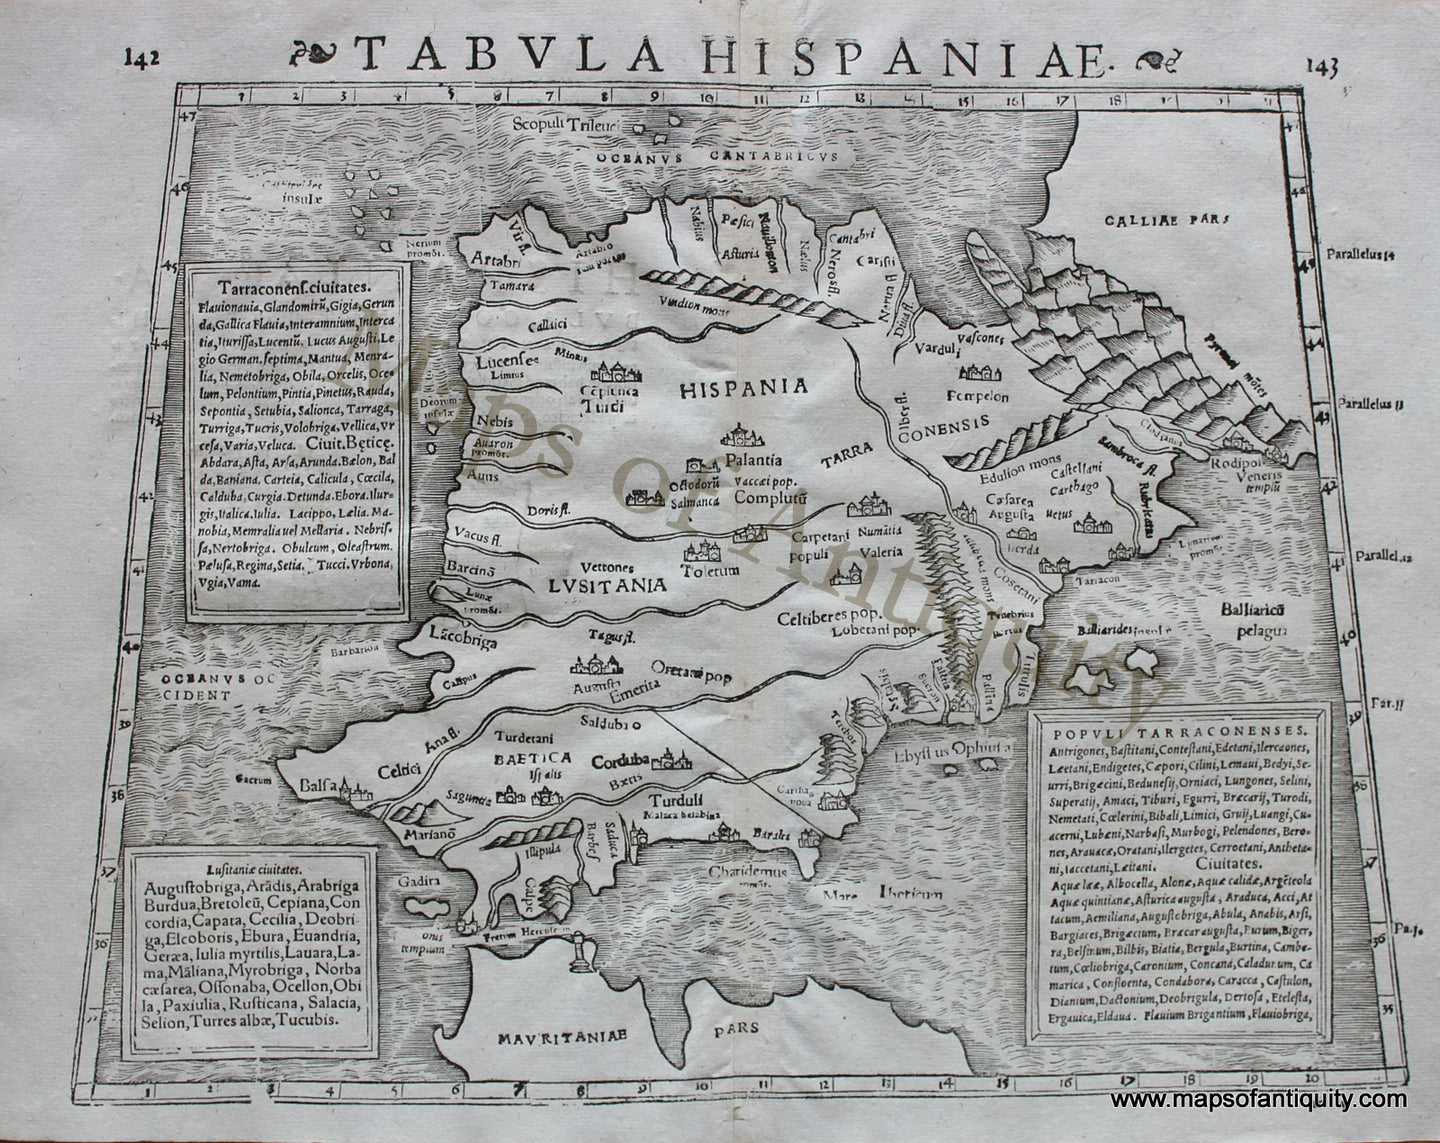 Antique-Black-and-White-Engraved-Map-Tabula-Hispaniae-Spain-and-Portugal-**********-Europe-Spain-and-Portugal-1542-Munster-Maps-Of-Antiquity